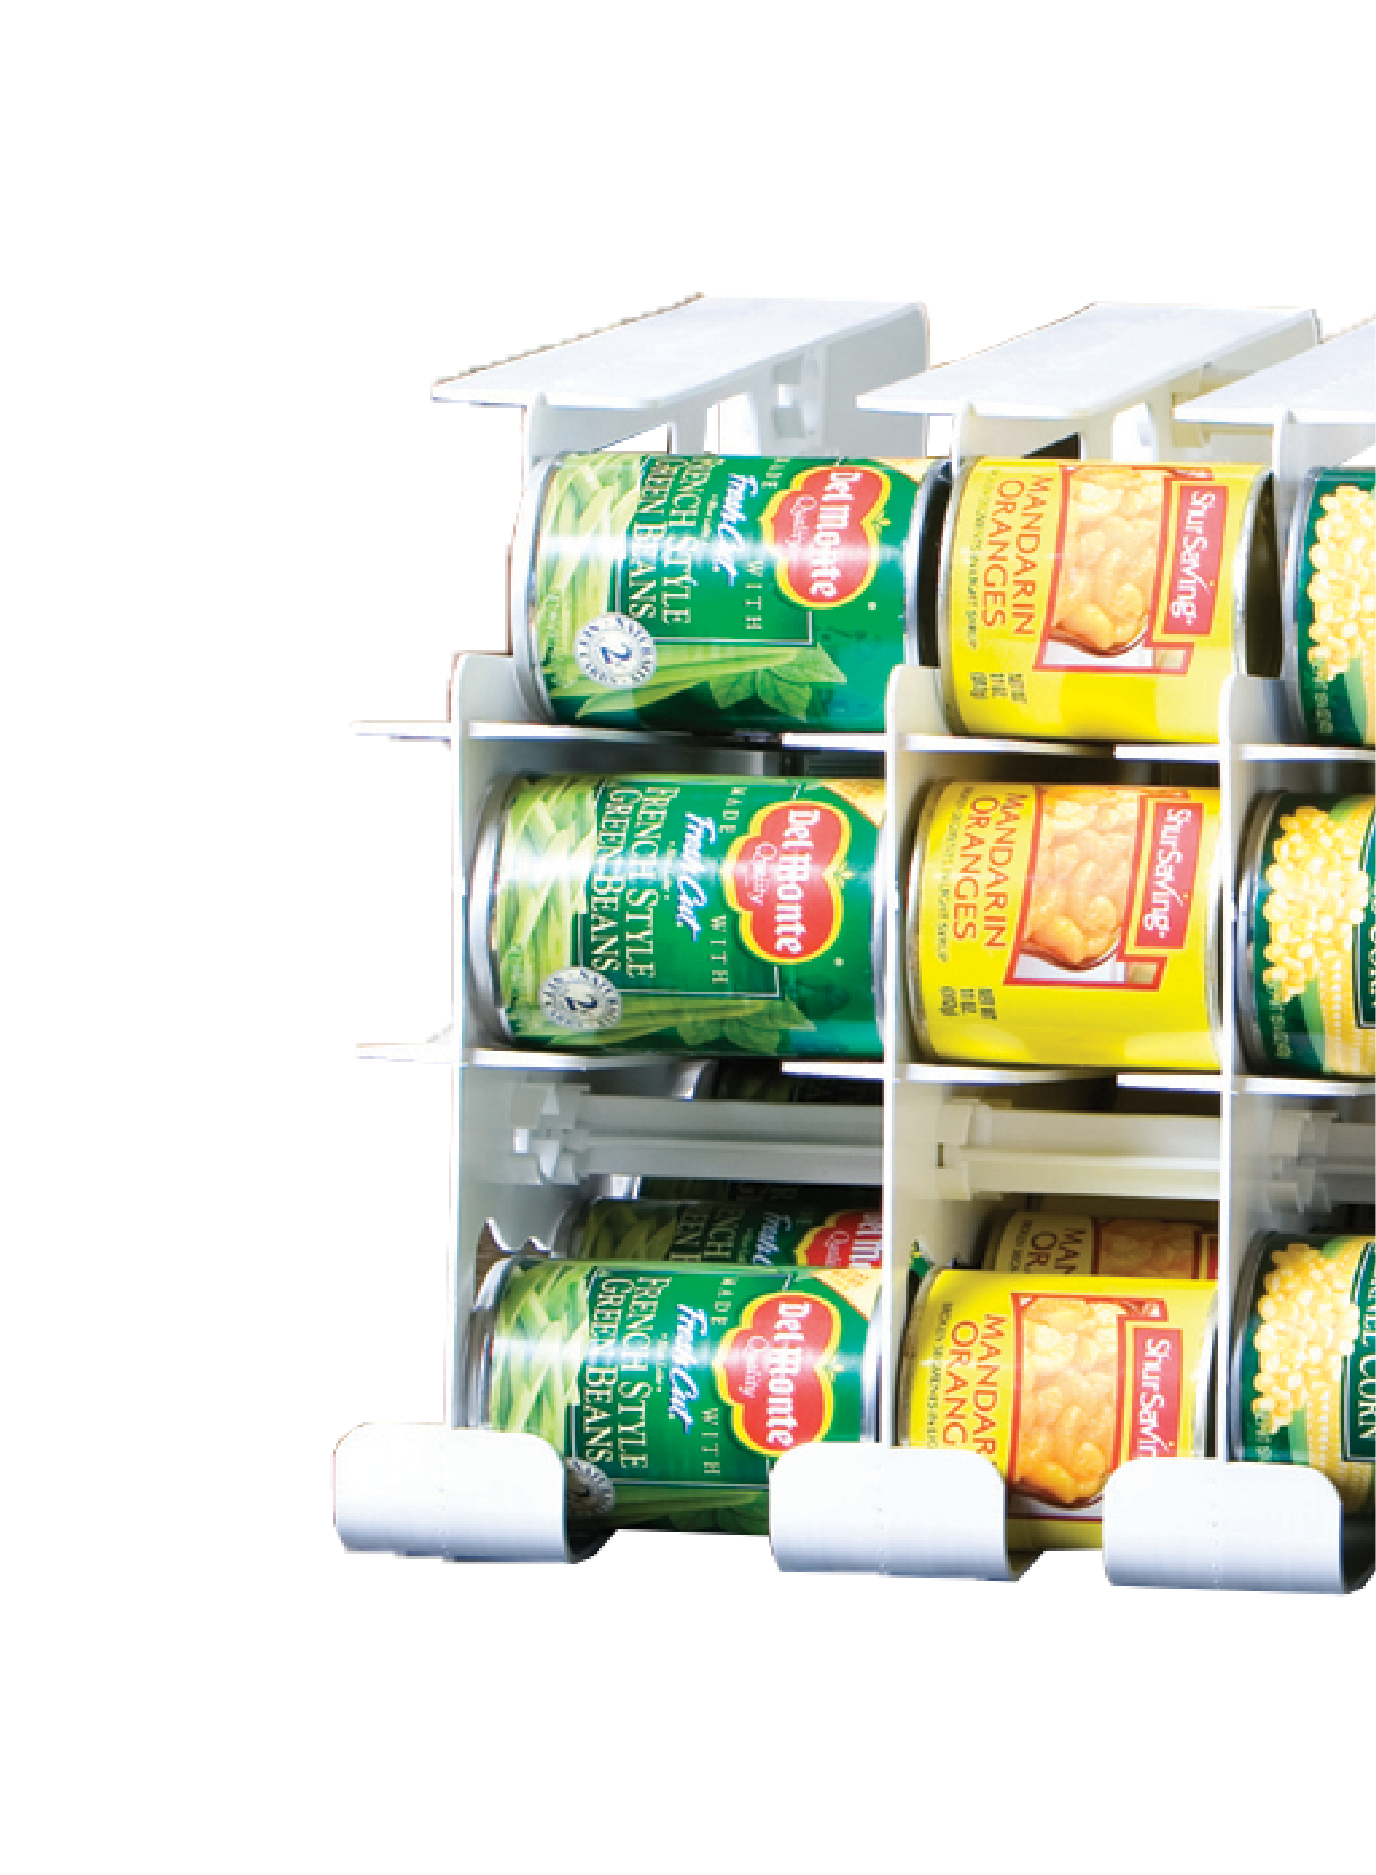 Shelf Reliance Cansolidator Pantry Plus 60 Cans Organizer for Pantry |  Rotating Canned Food Storage Kitchen Organizer and Storage